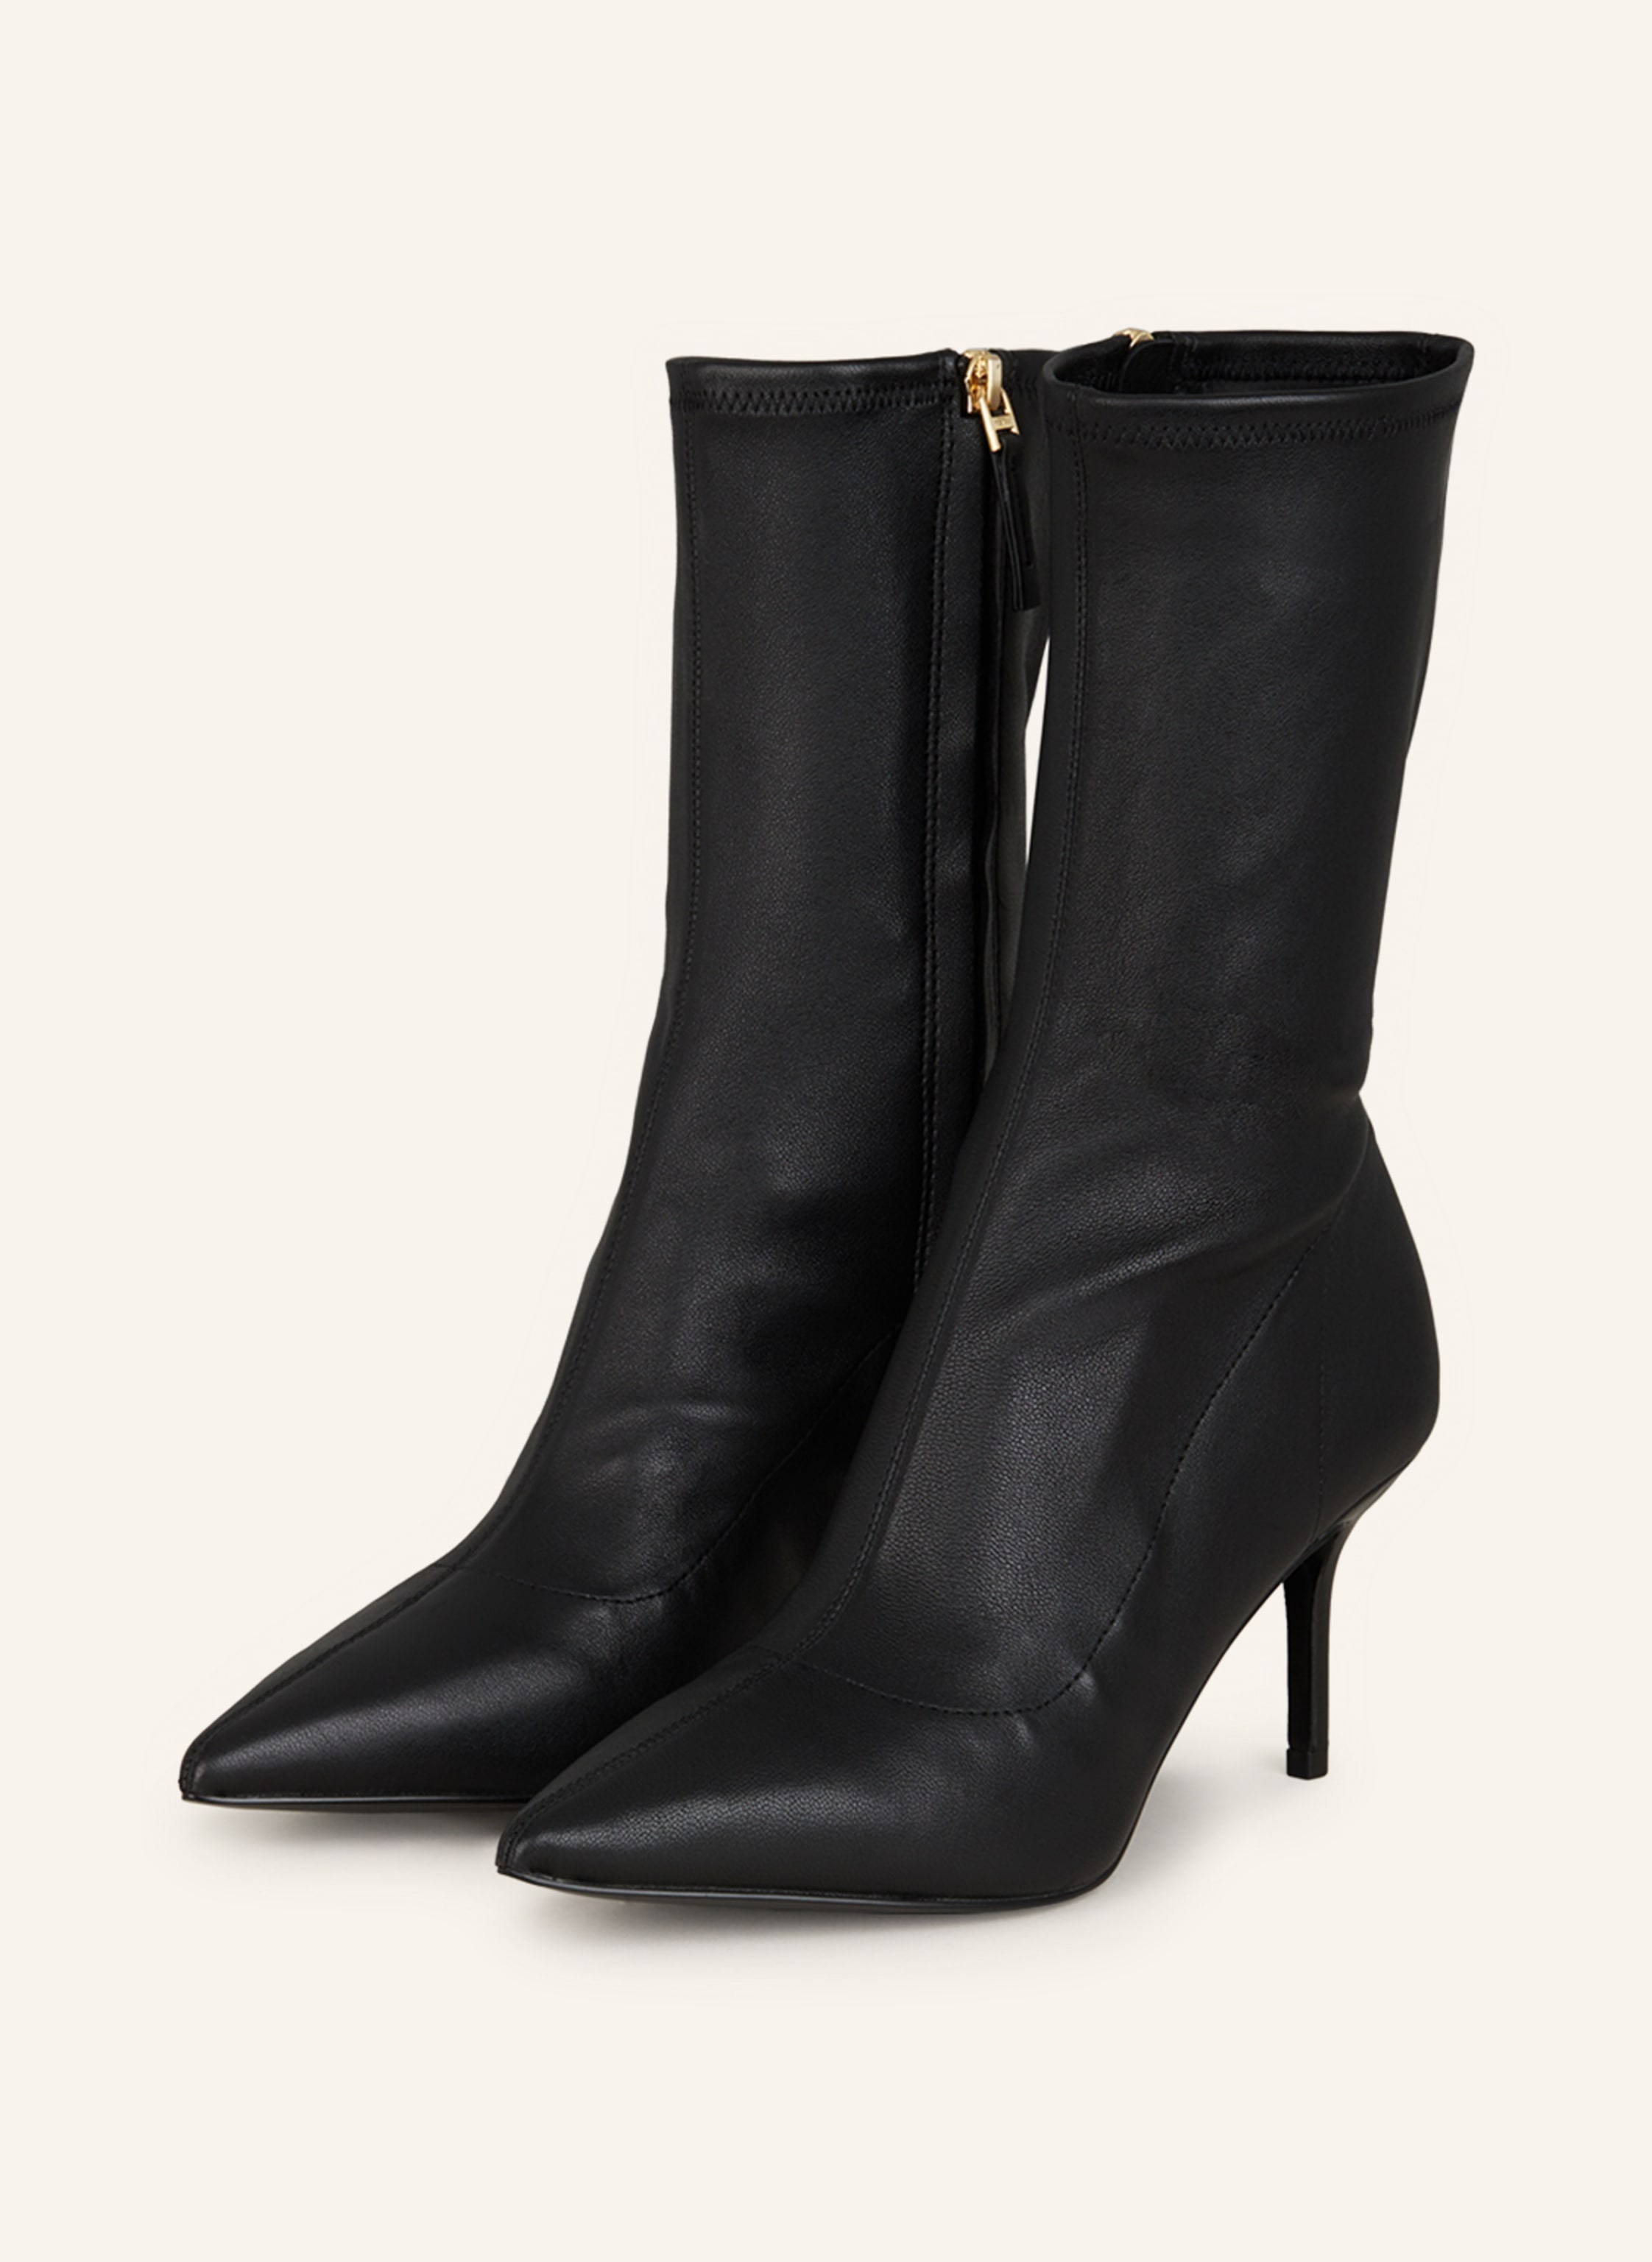 REISS Ankle boots CALEY in black | Breuninger